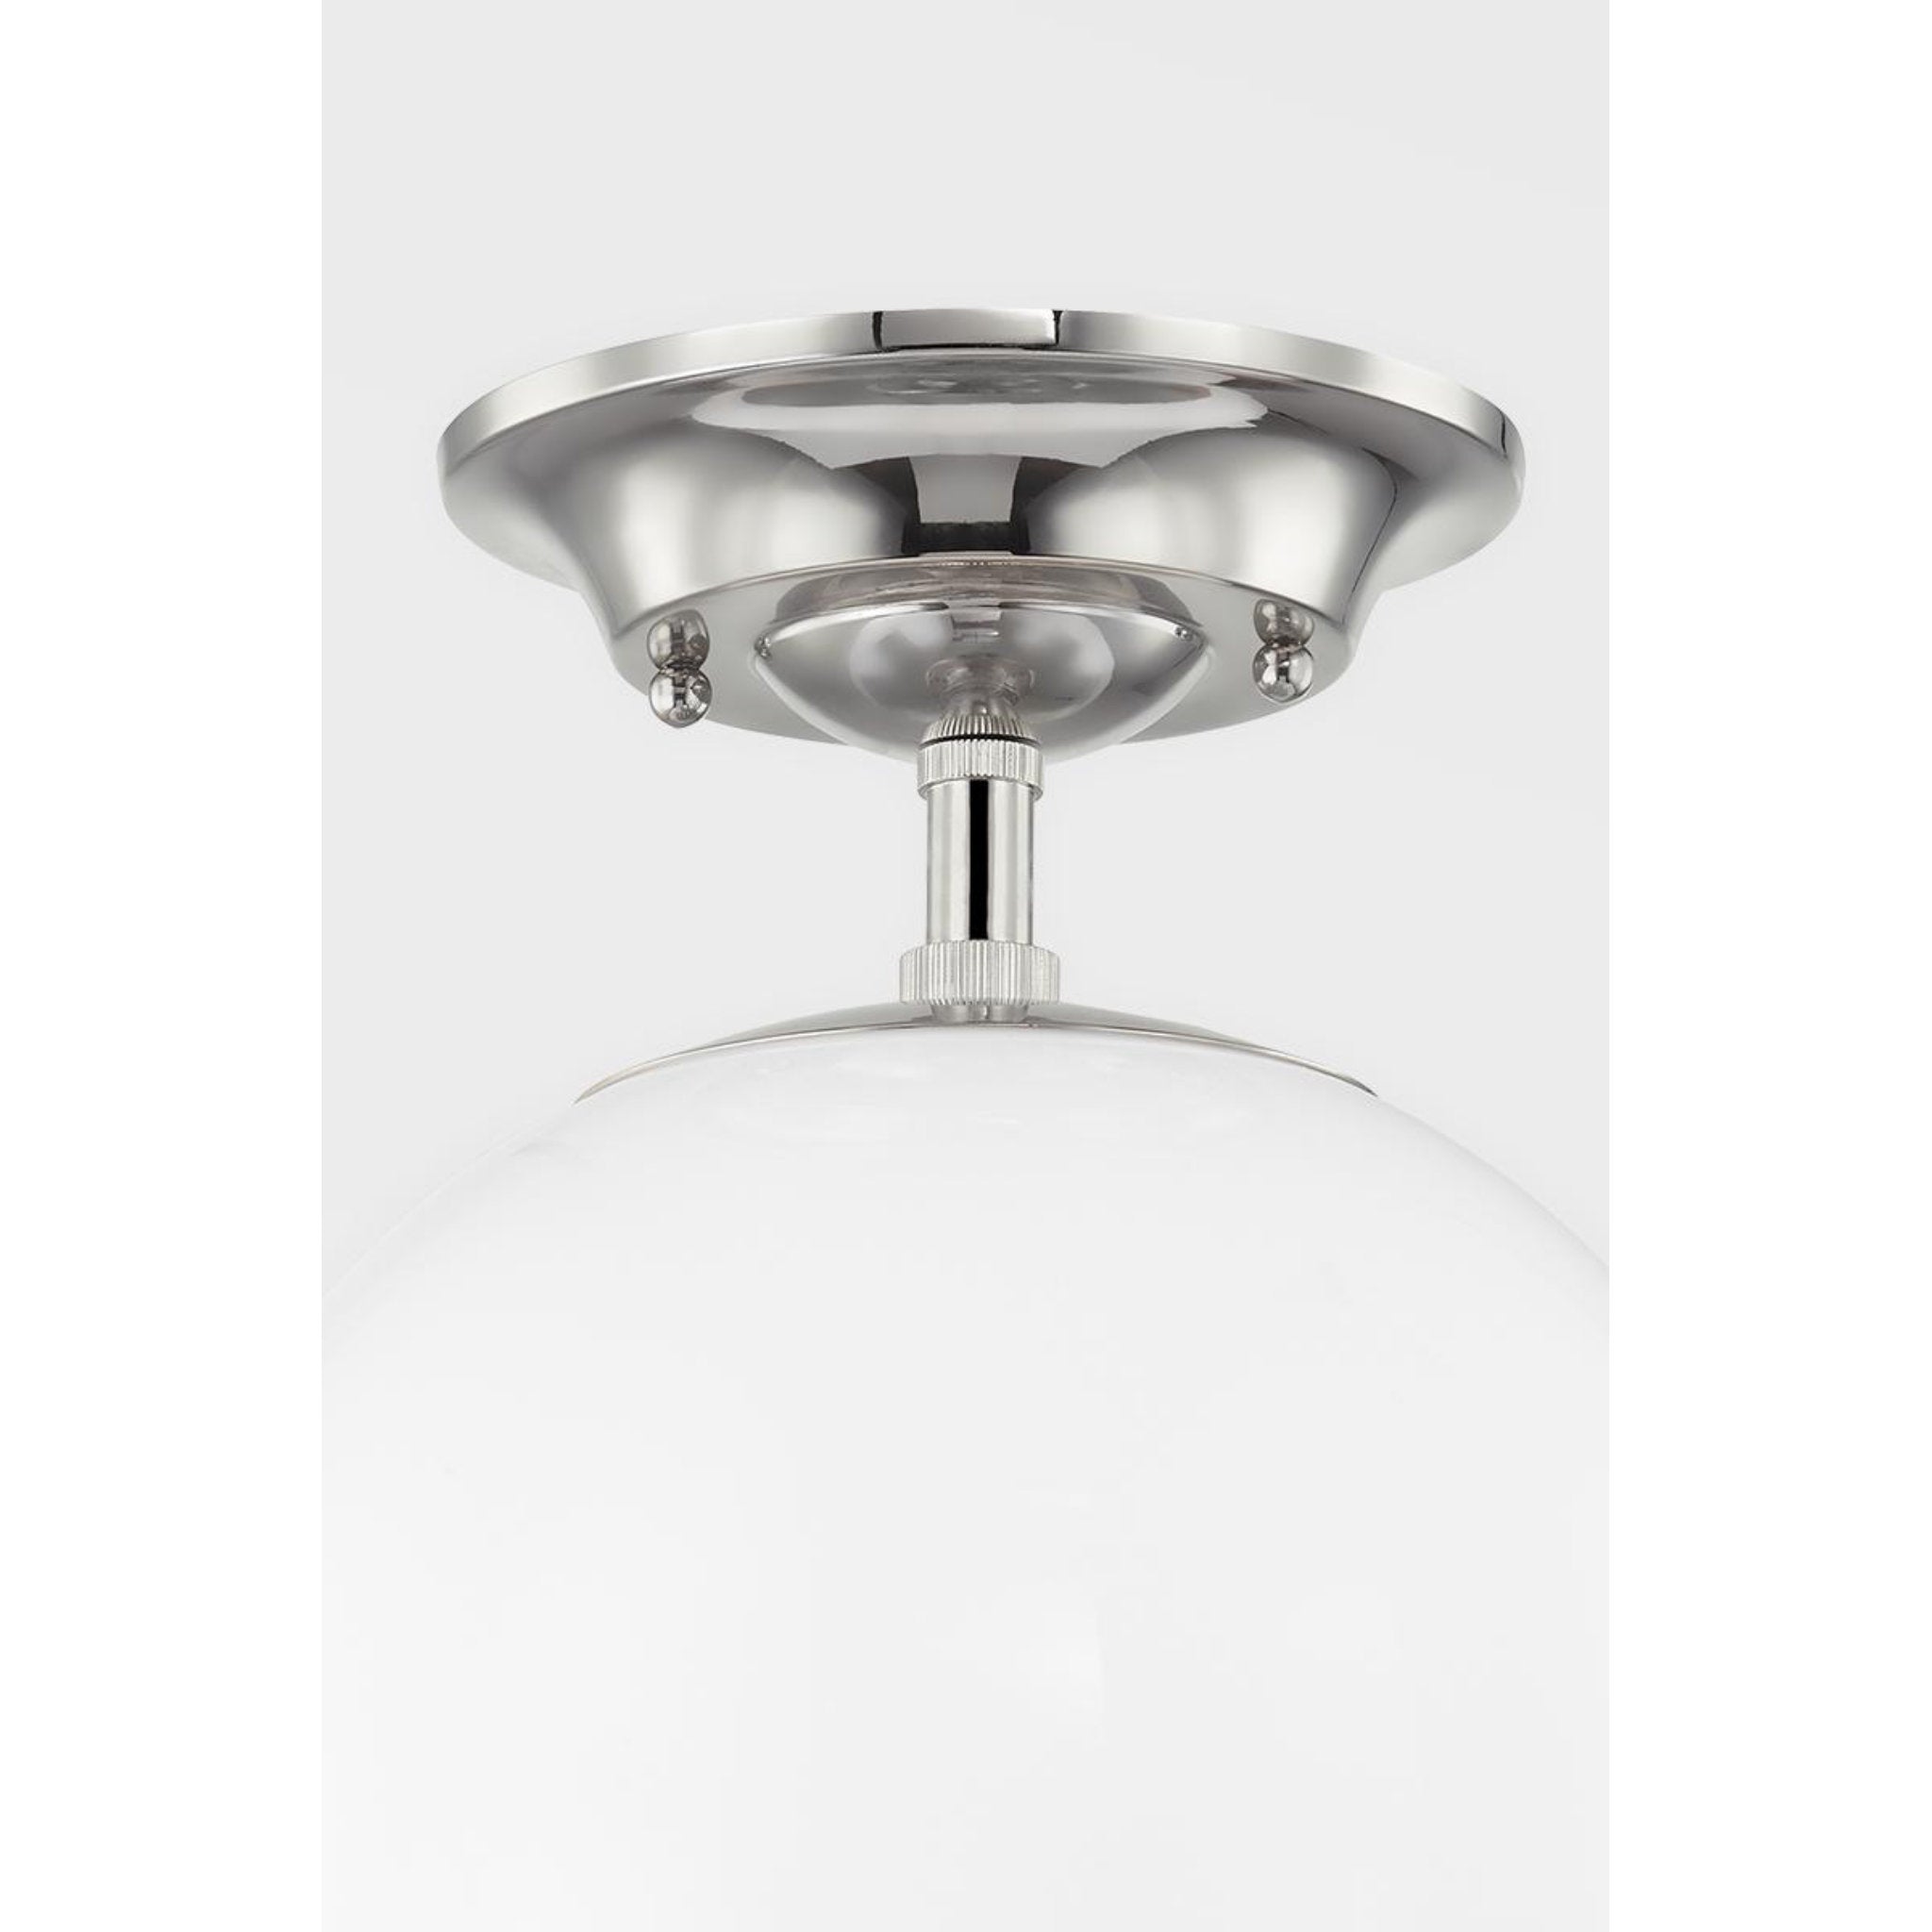 Sphere No.1 1 Light Pendant in Polished Nickel by Mark D. Sikes